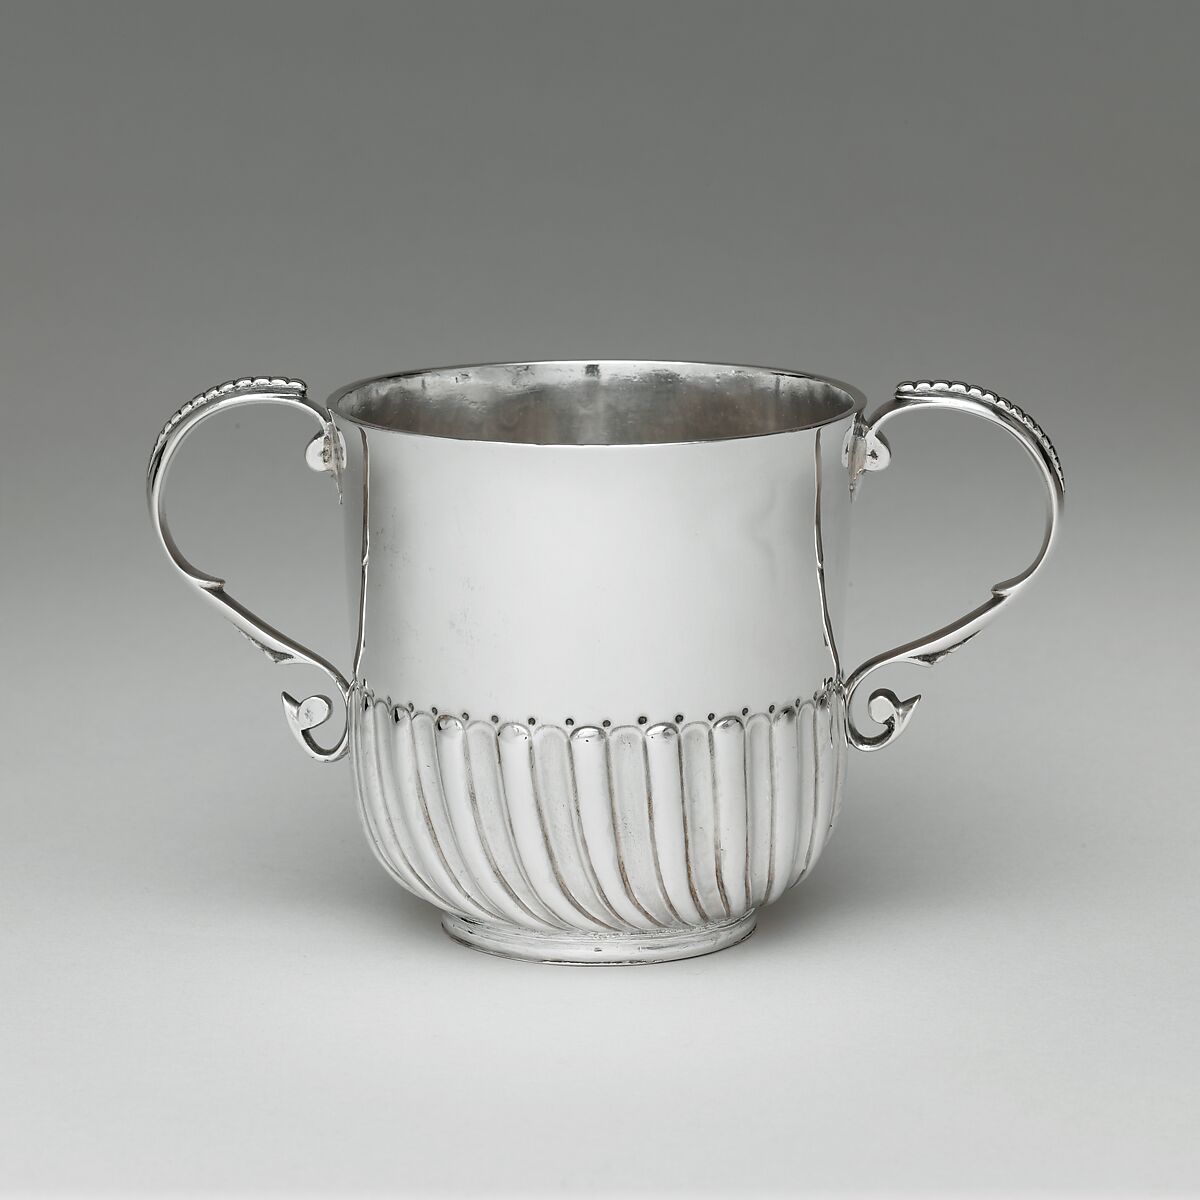 Two-handled Cup, William Cowell Sr. (1682/83–1736), Silver, American 